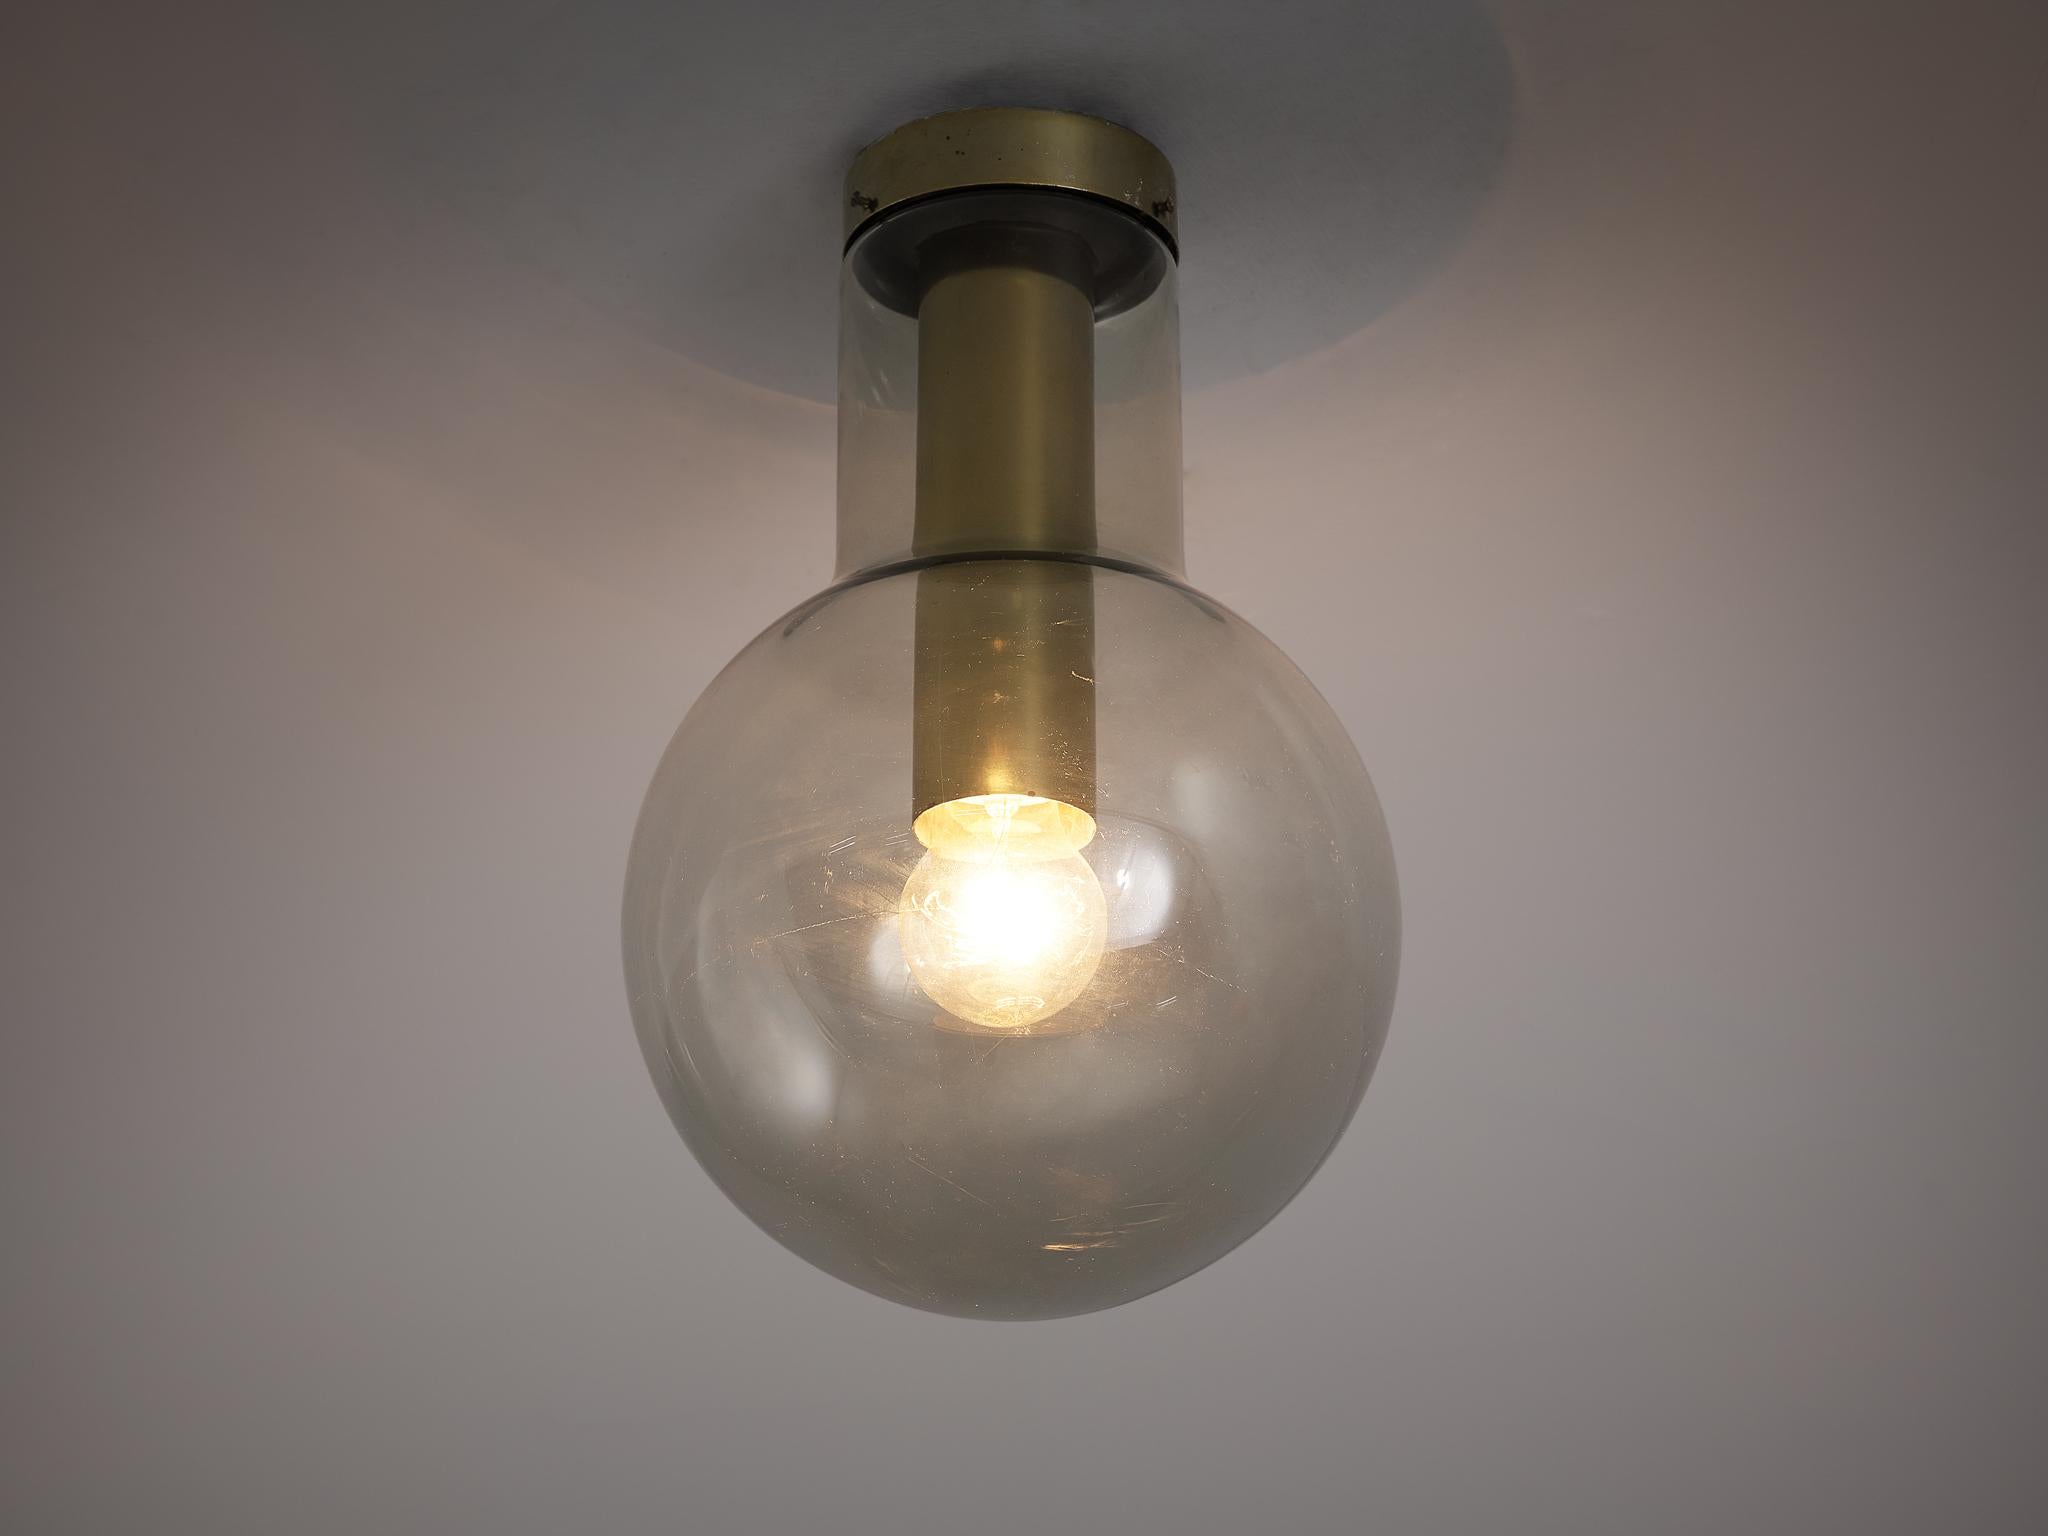 RAAK Amsterdam, ceiling light model 'Maxi-Light Bulb' B-1260, brass, smoked glass, The Netherlands, 1960s.

RAAK created an amusing lamp by building a light bulb around a light bulb. A distinctive design is created by implementing a notable